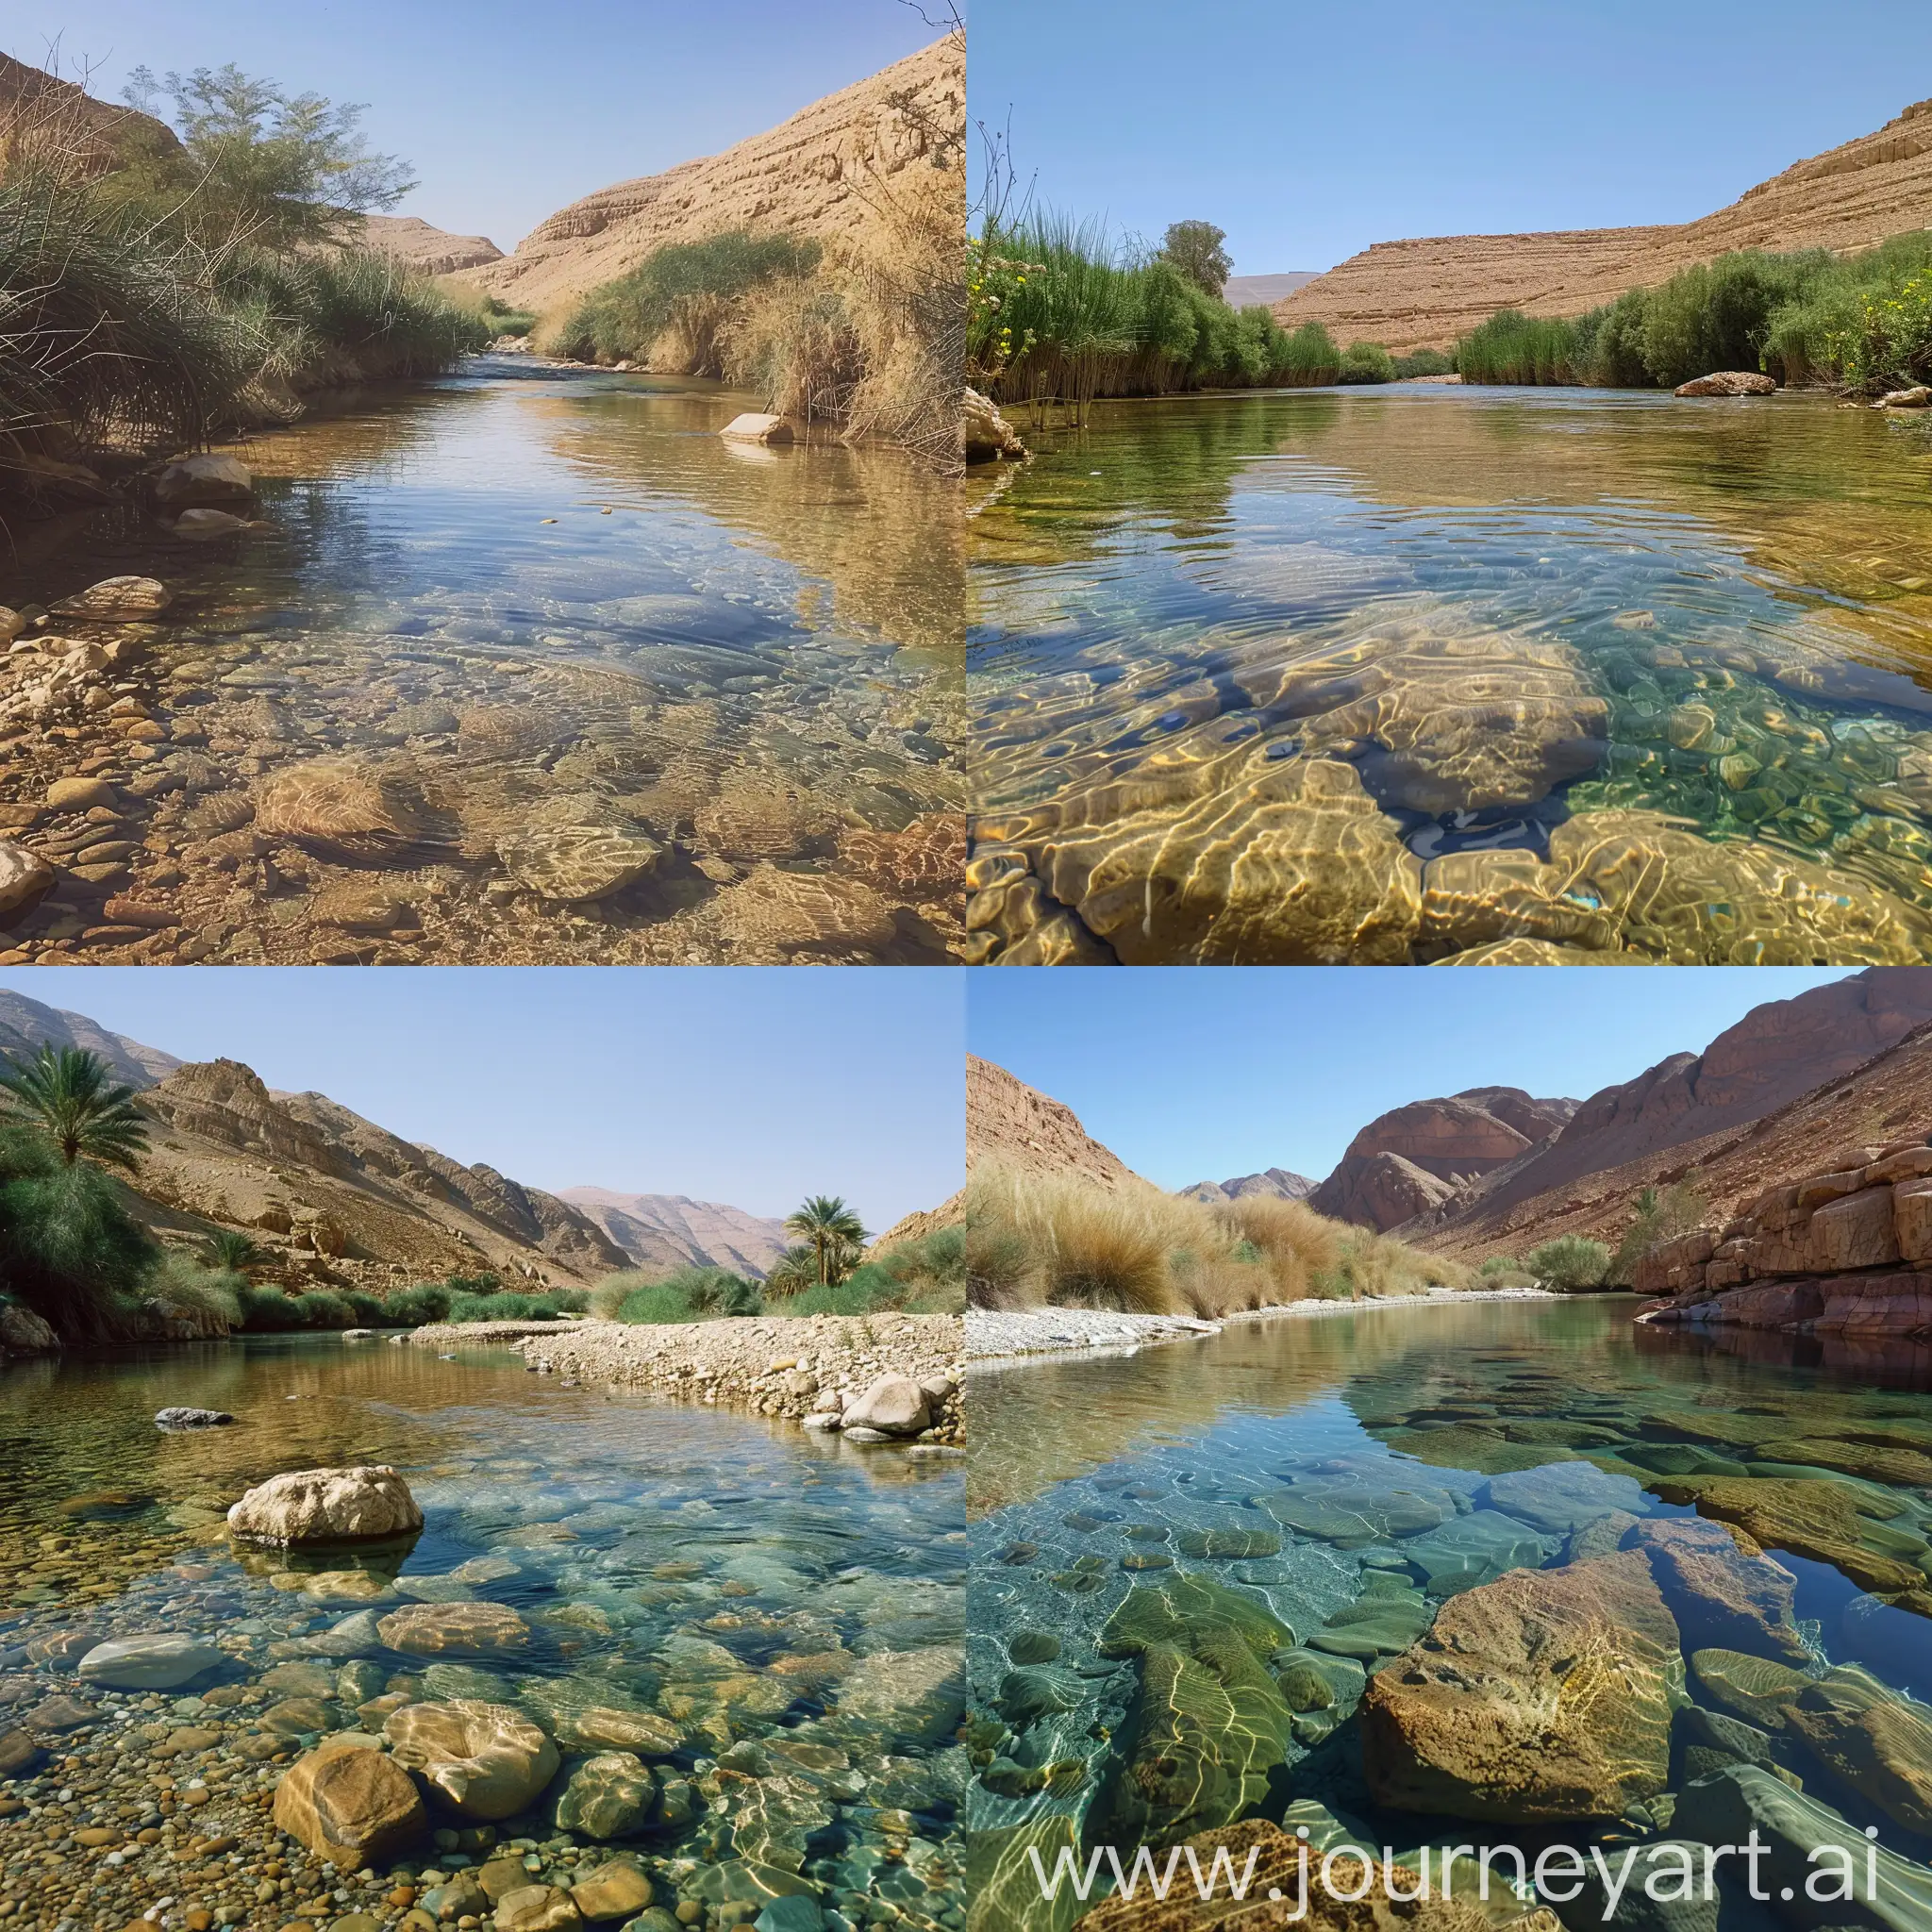 A clear and pleasant river that God made to flow in the heart of the desert